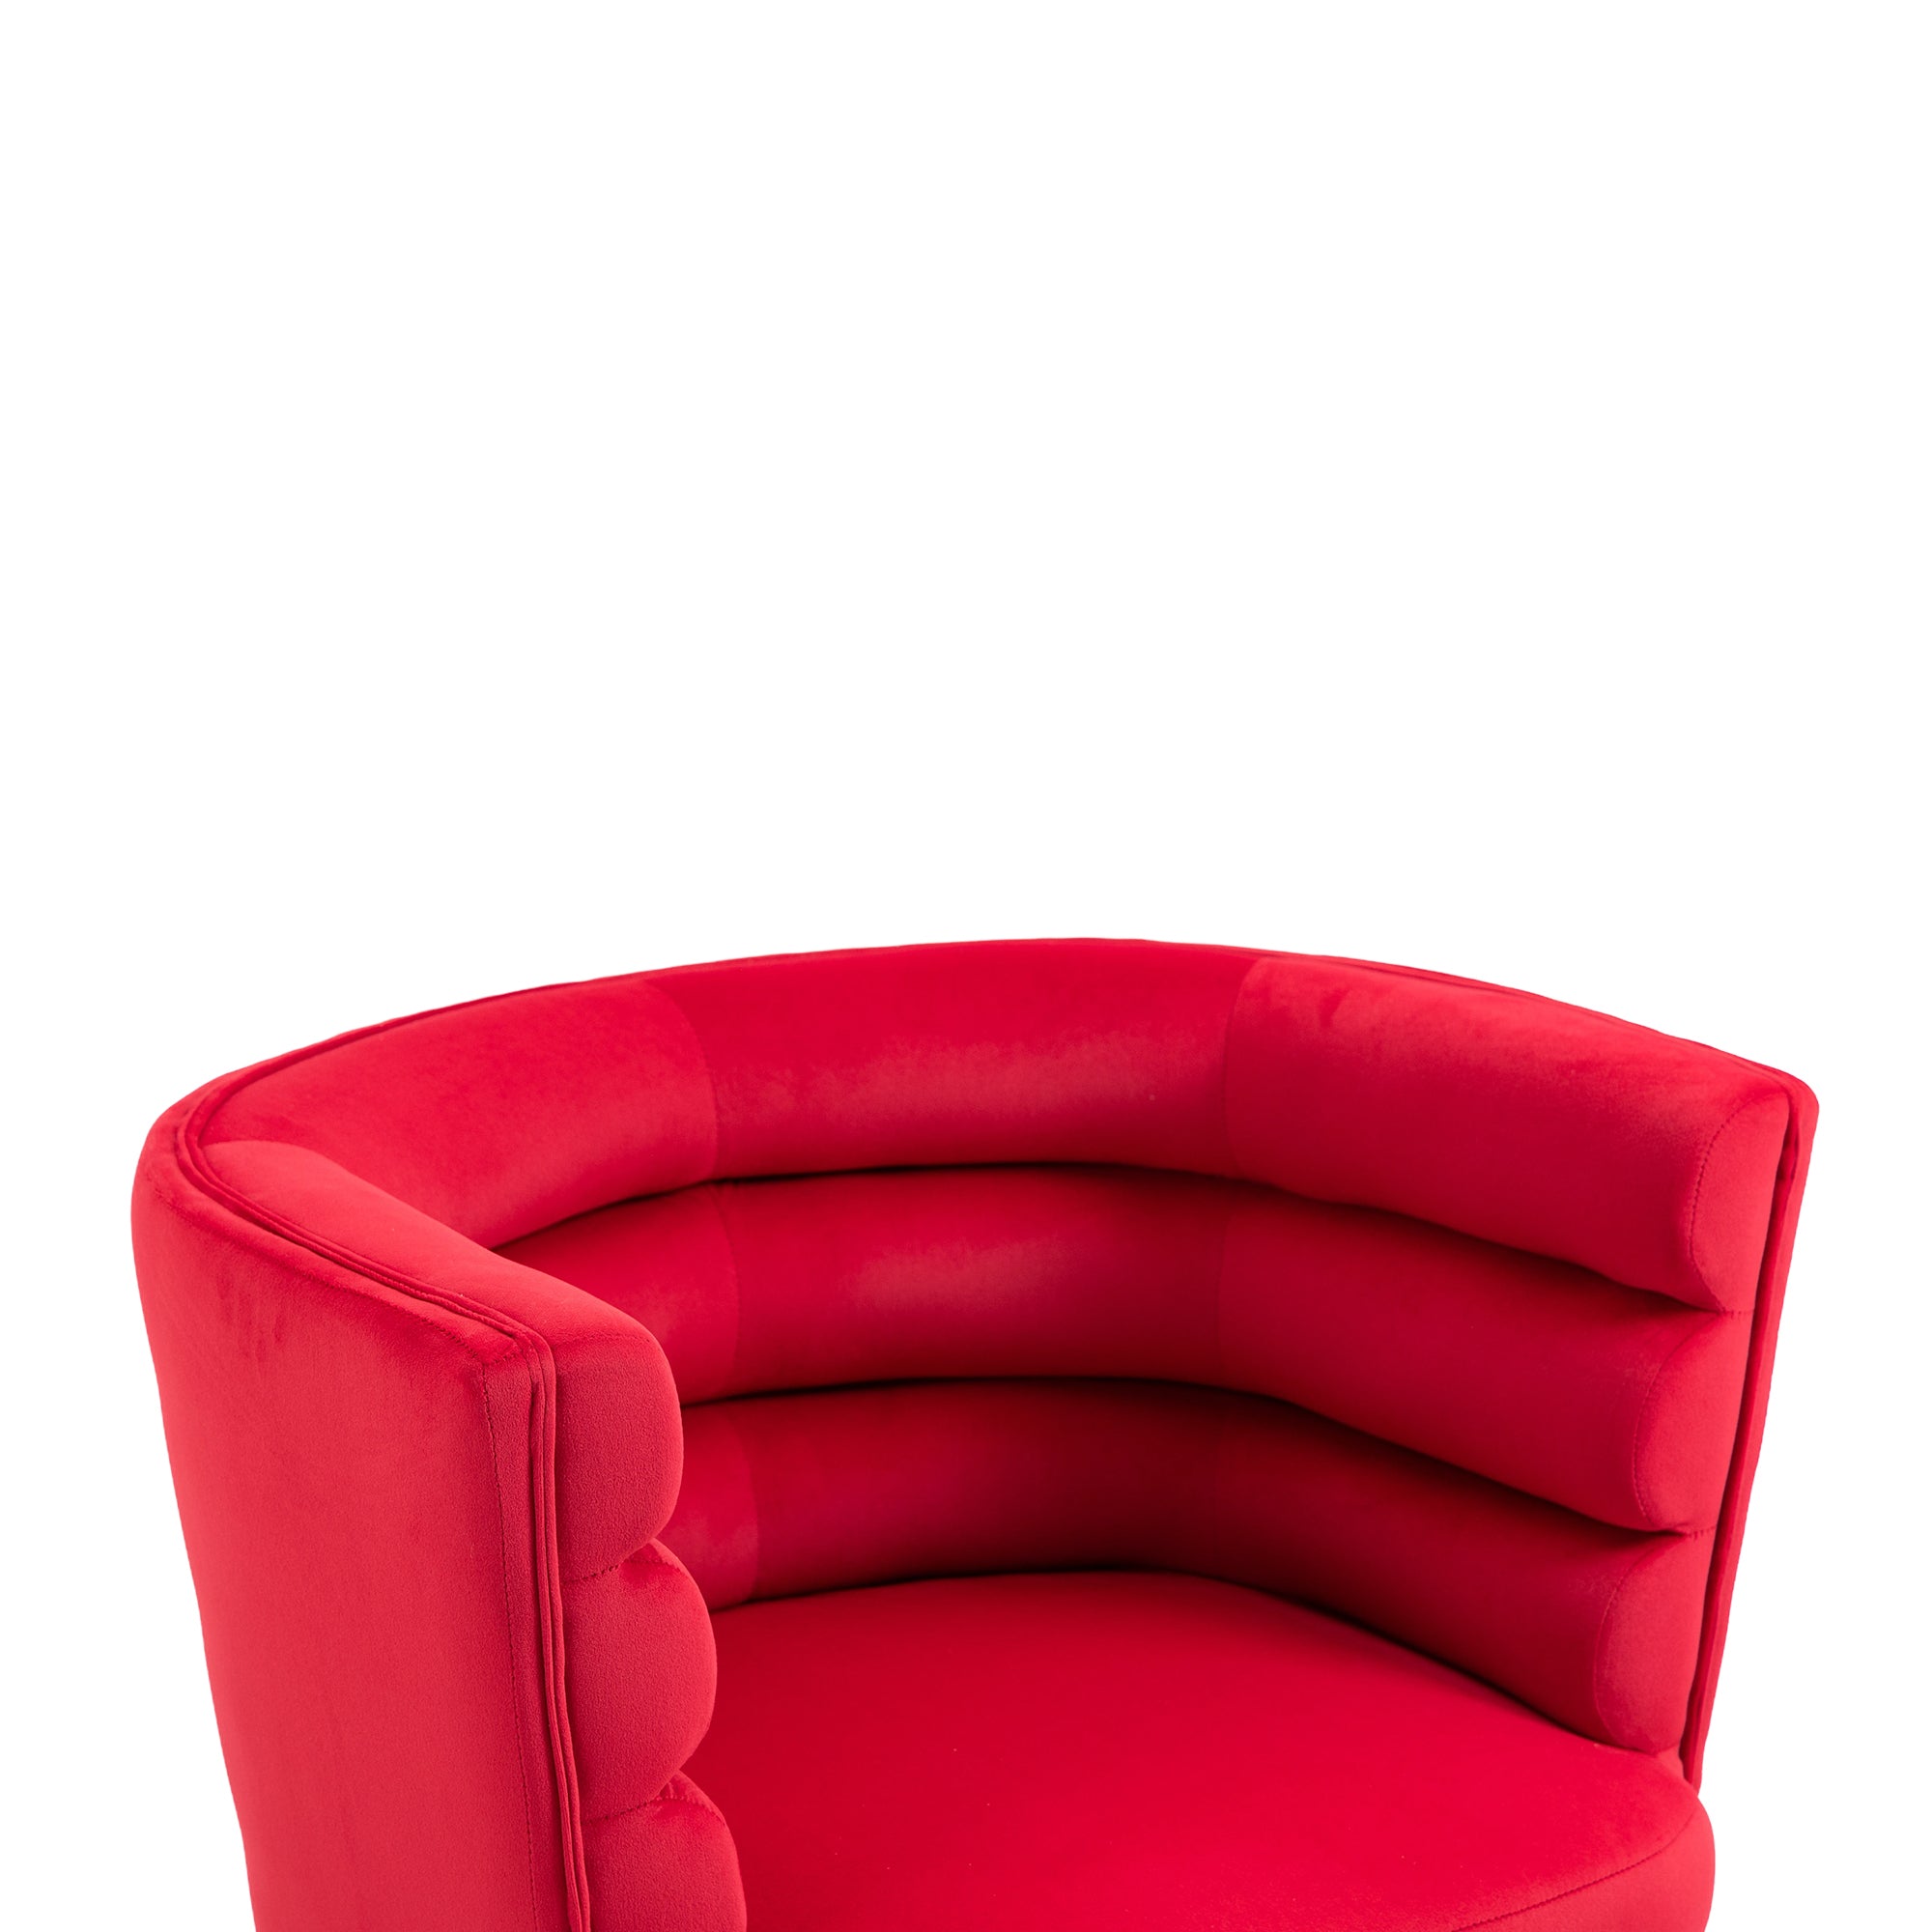 COOLMORE Accent Chair ,leisure single chair with red-velvet